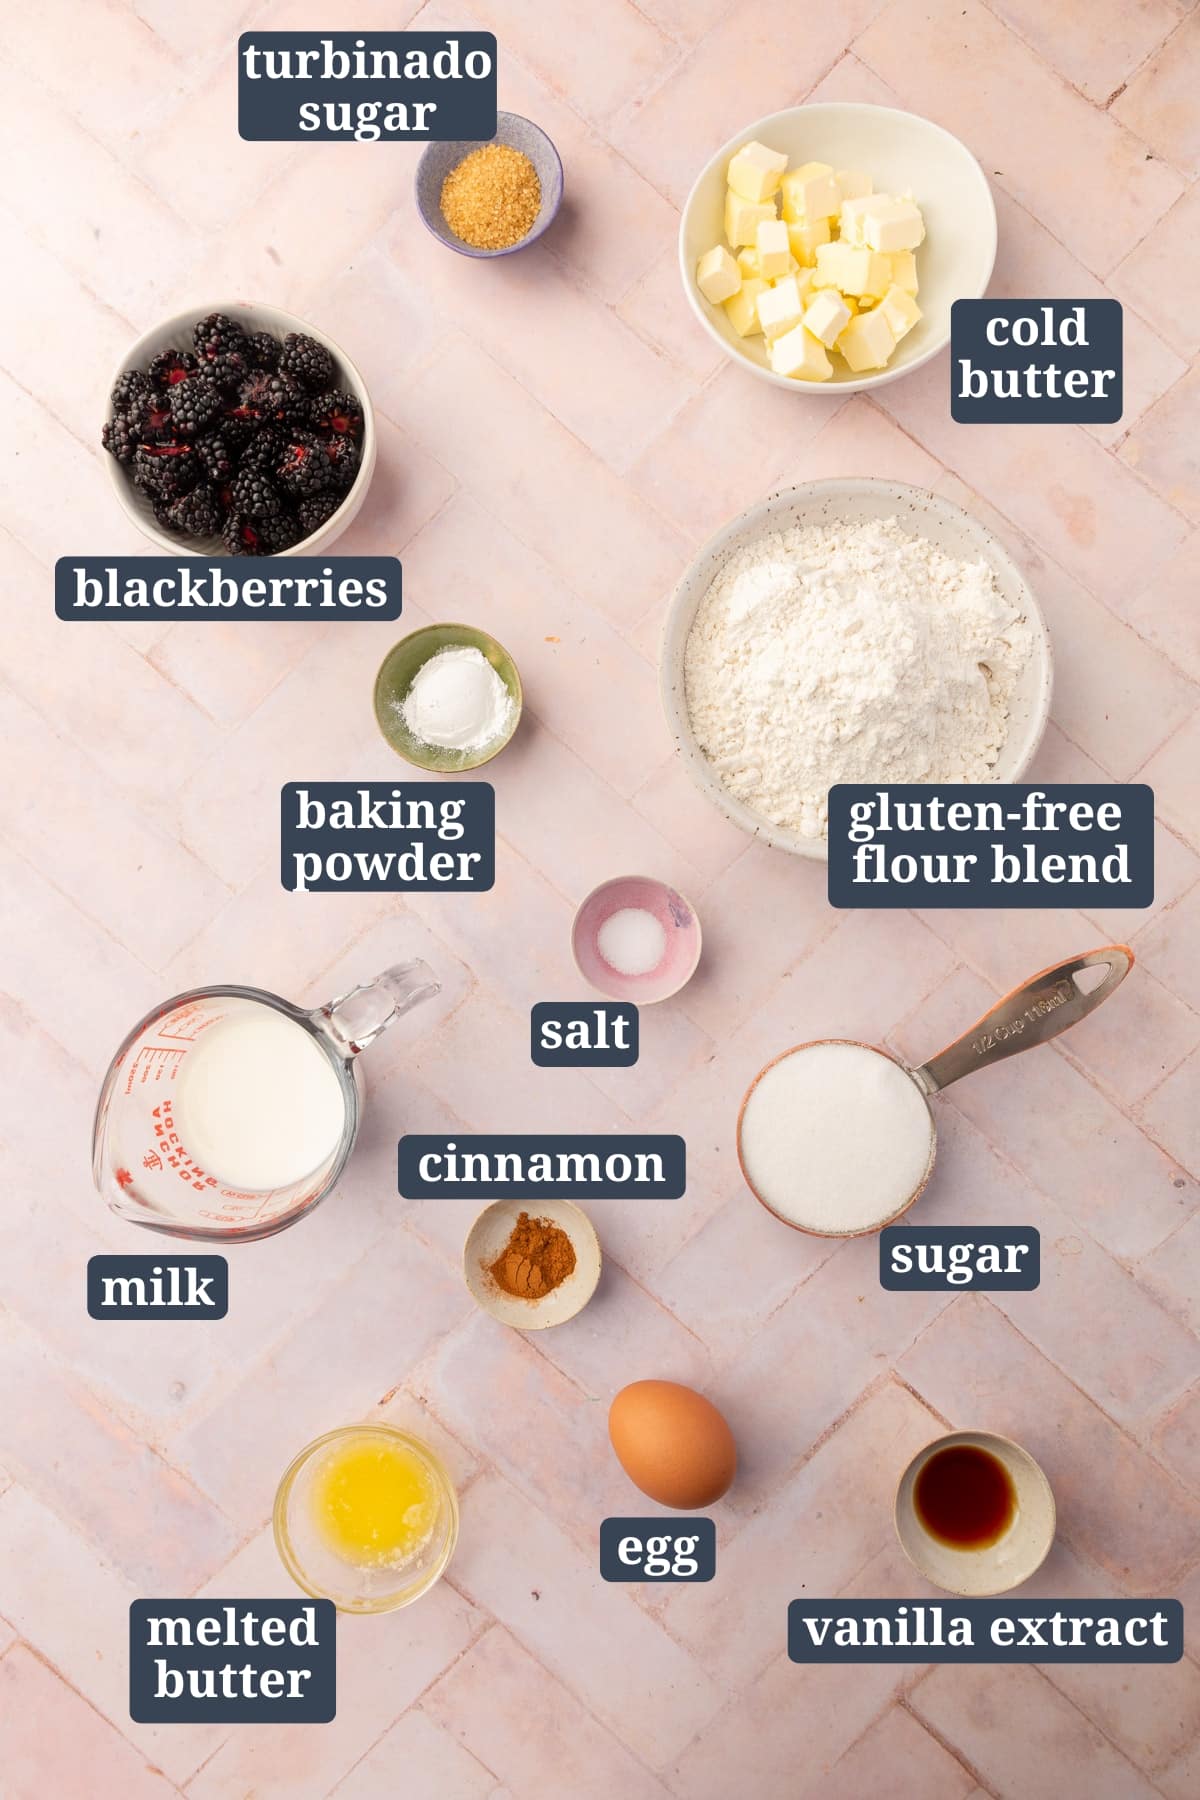 Ingredients in small bowls to make gluten free blackberry scones including turbinado sugar, cold butter, blackberries, baking powder, gluten-free flour blend, salt, milk, cinnamon, sugar, egg, melted butter, and vanilla extract with text overlays over each ingreidnet.